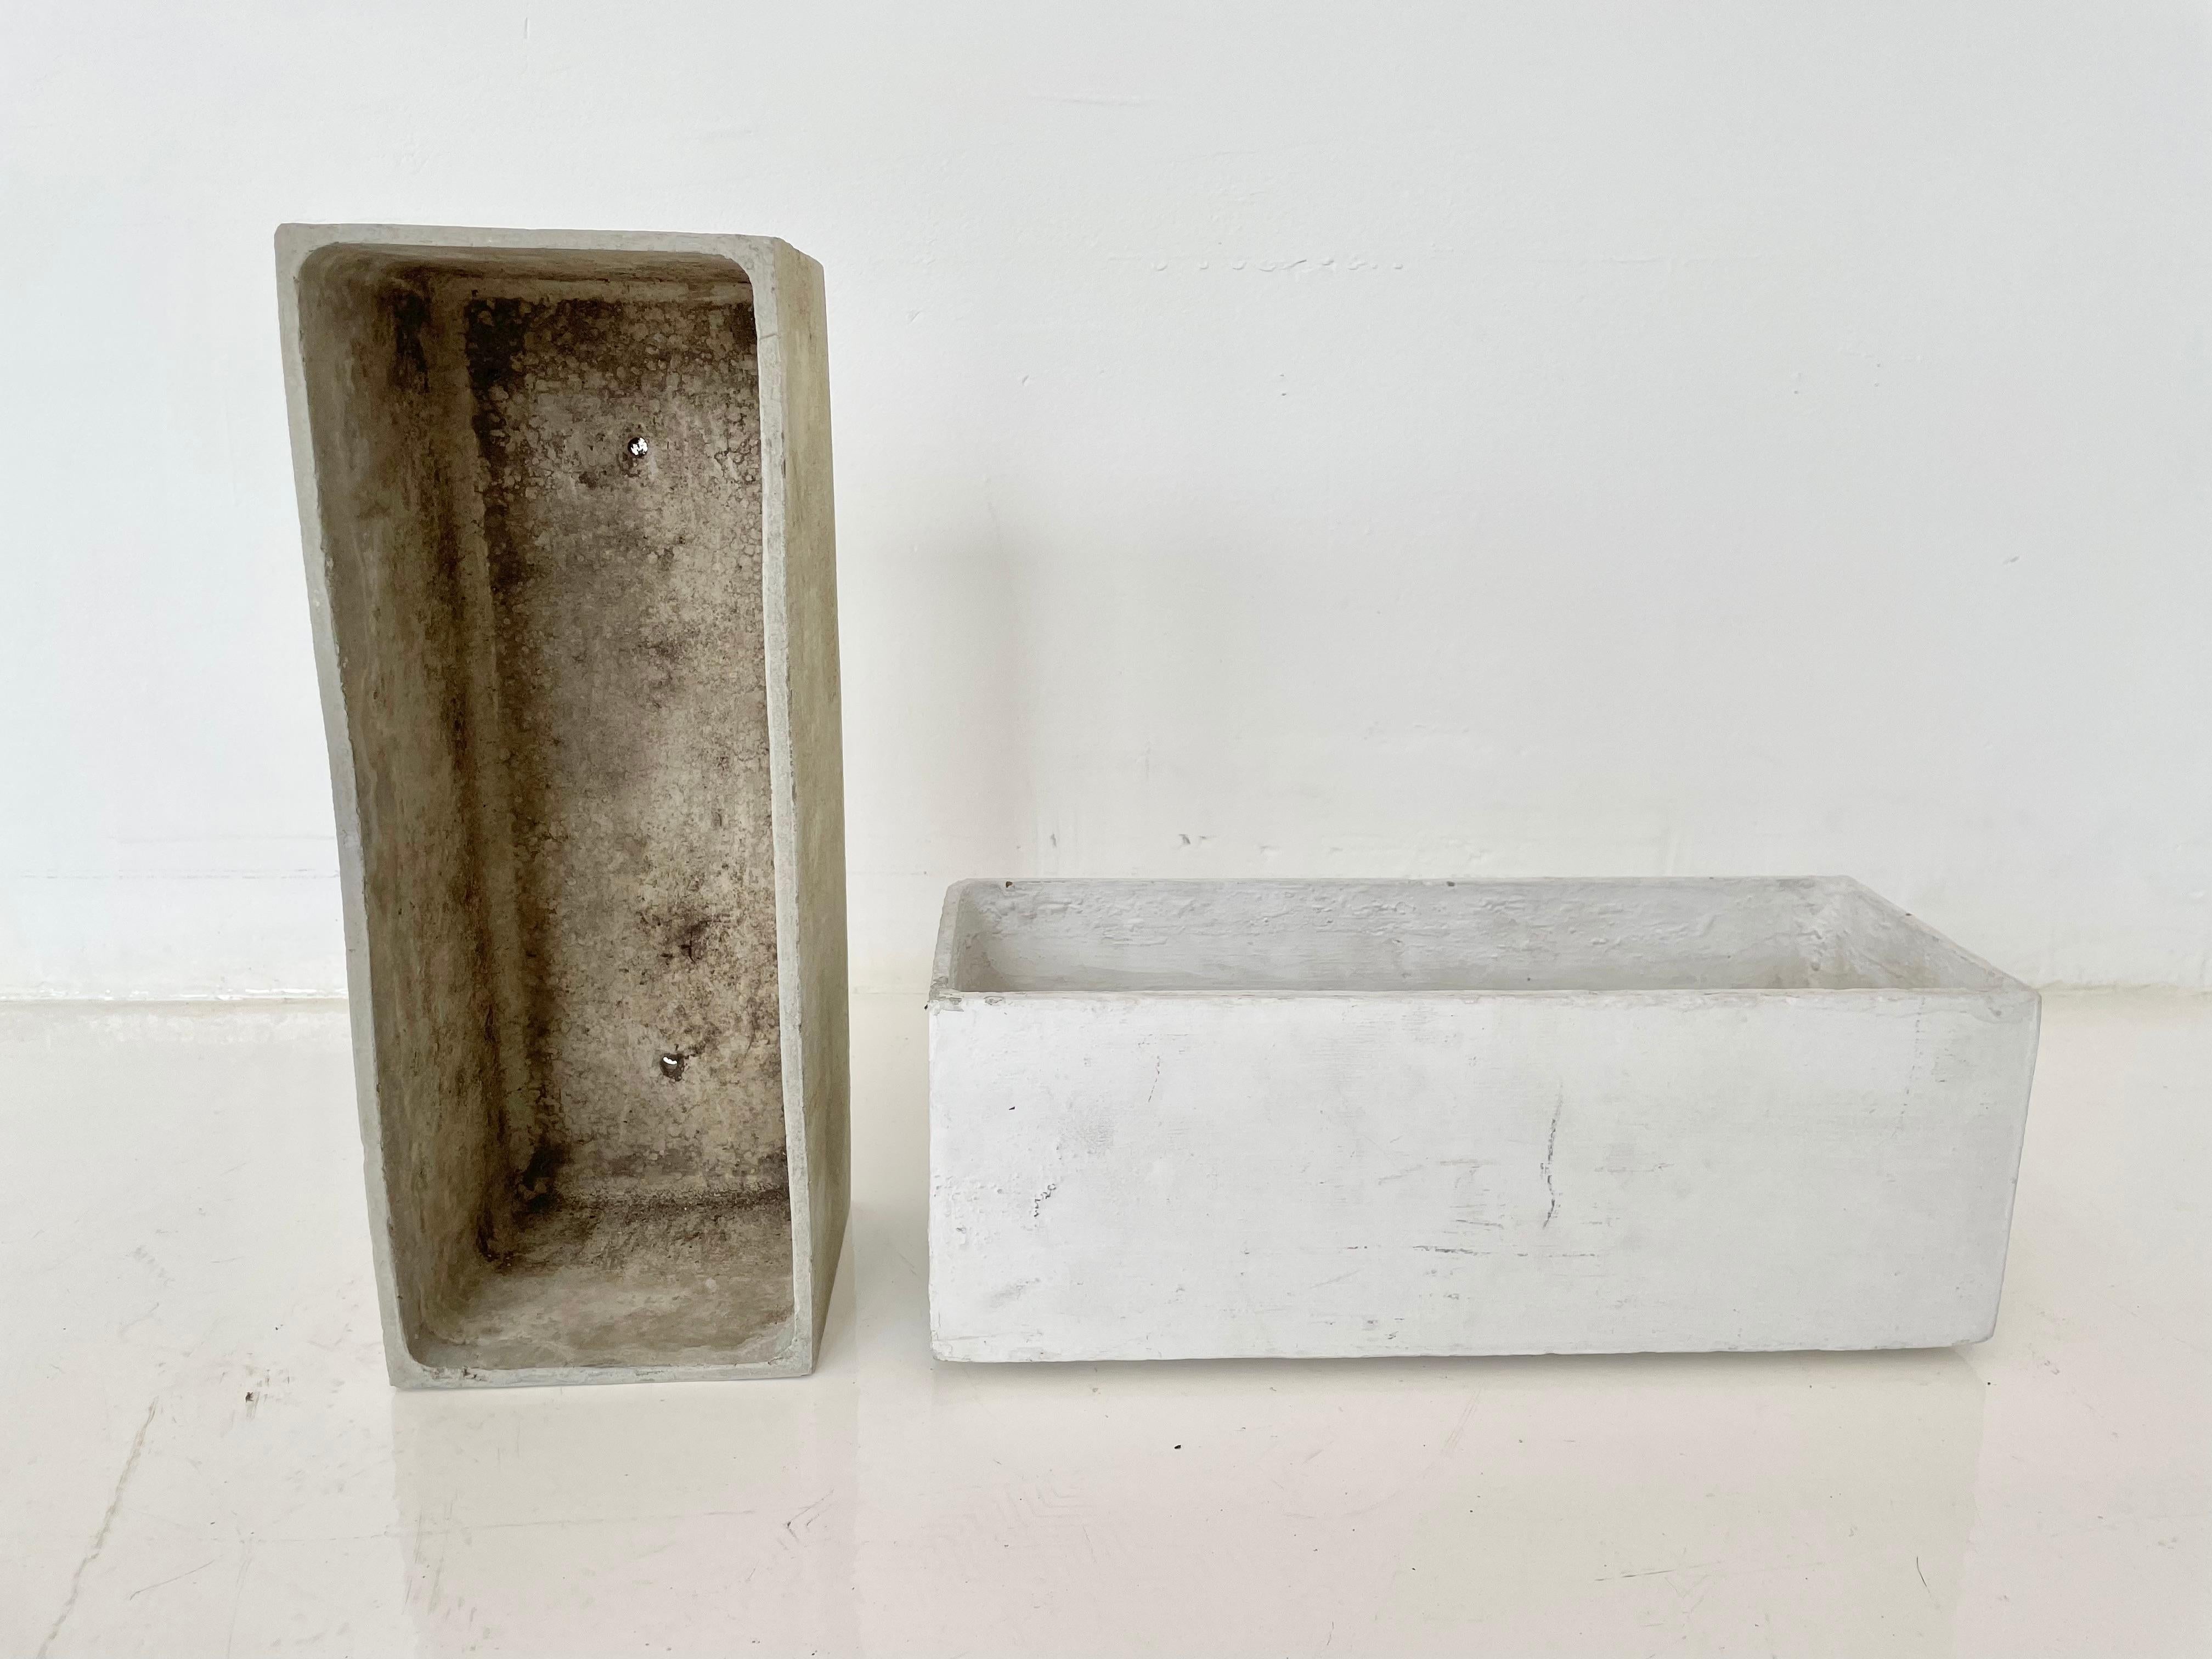 Concrete trough planters by Swiss architect Willy Guhl. Petite size. Just under 16